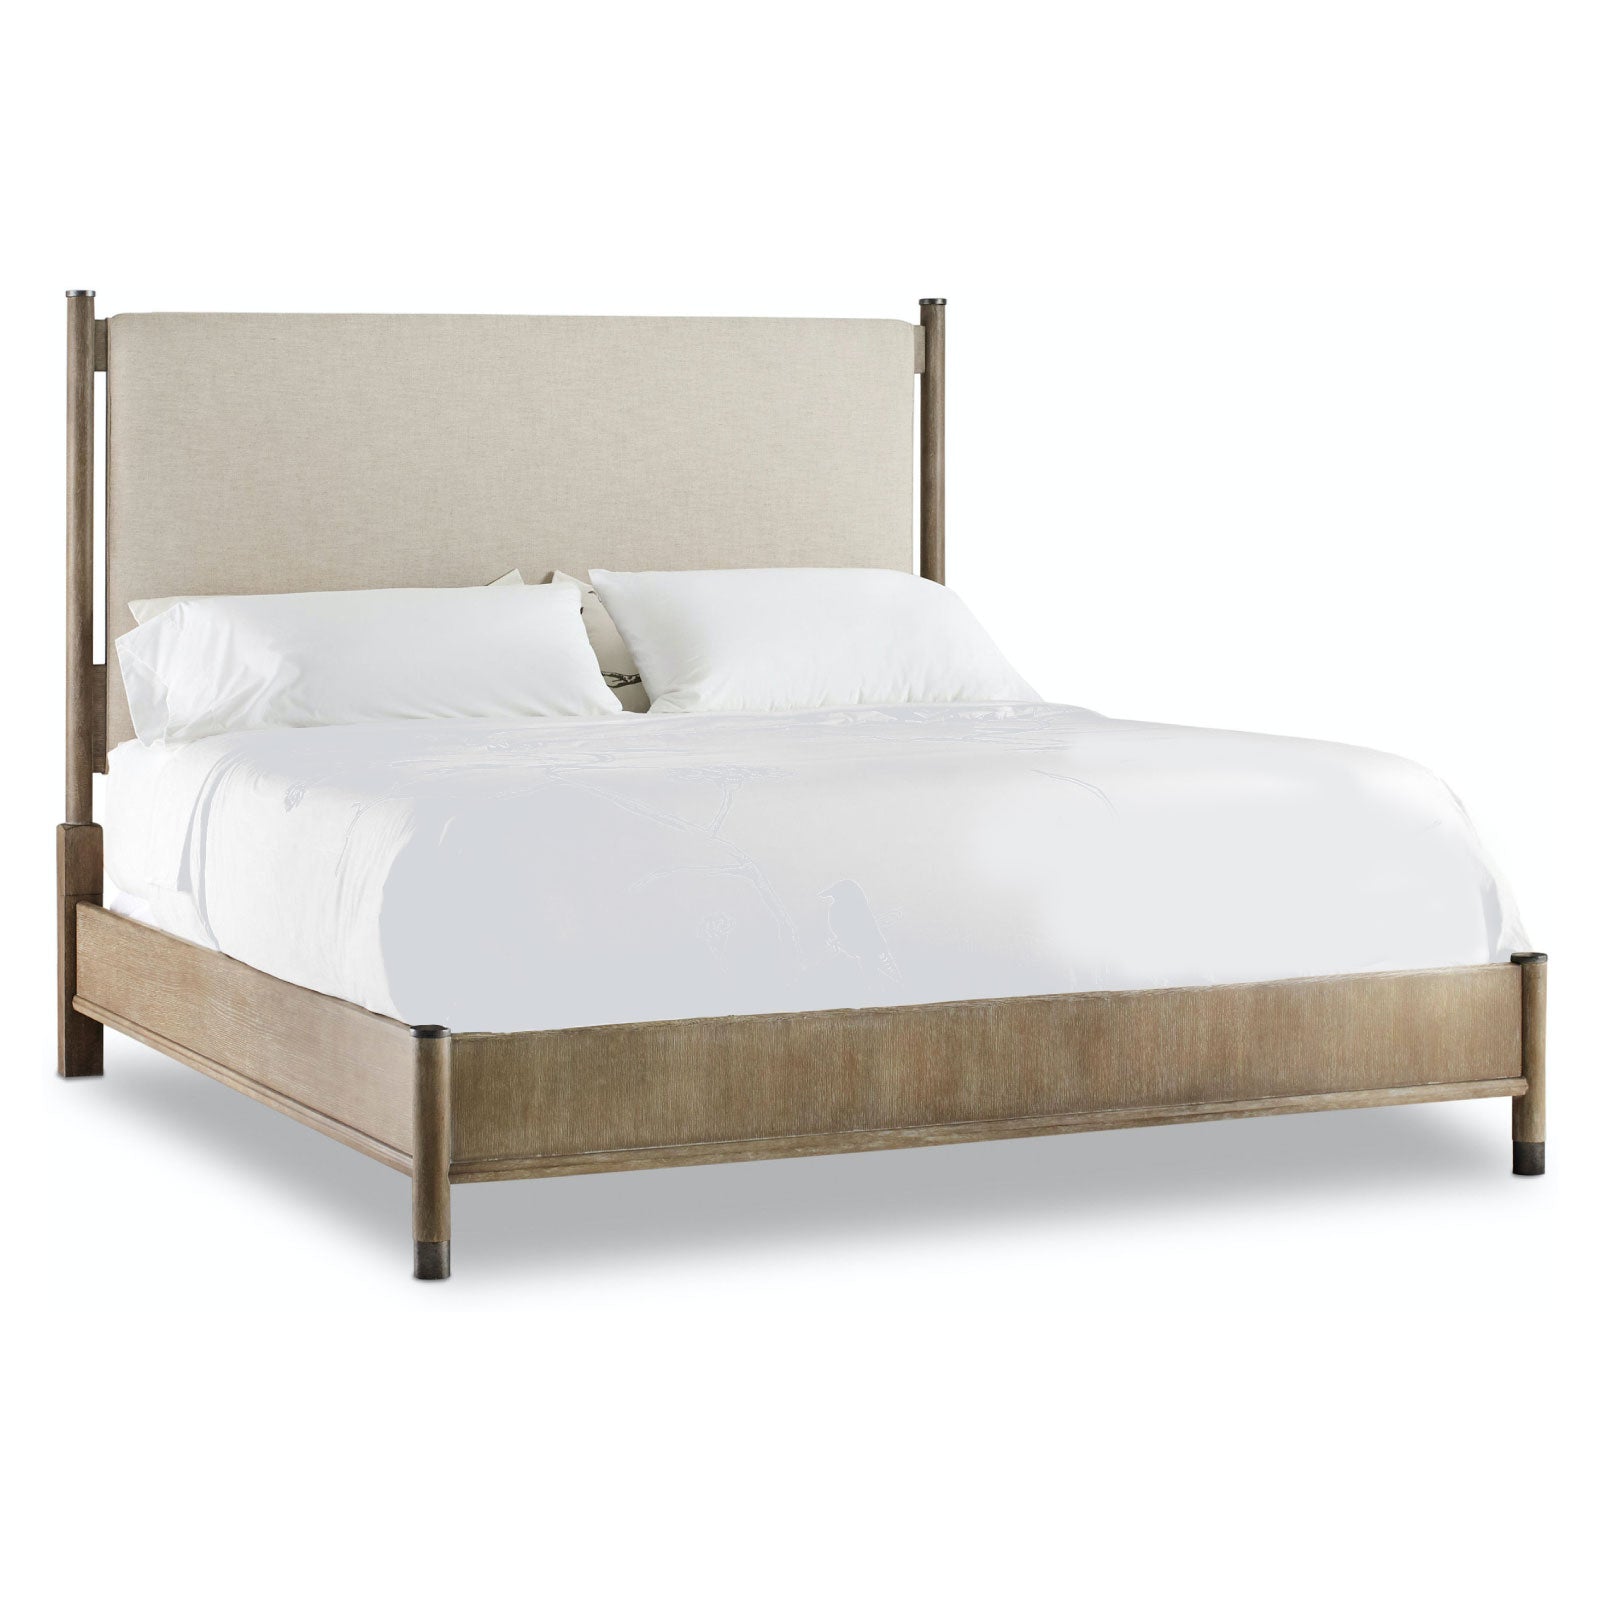 Bed frame constructed with soft, rounded edges and combined with sand-blasted greige and antique white oak finishes